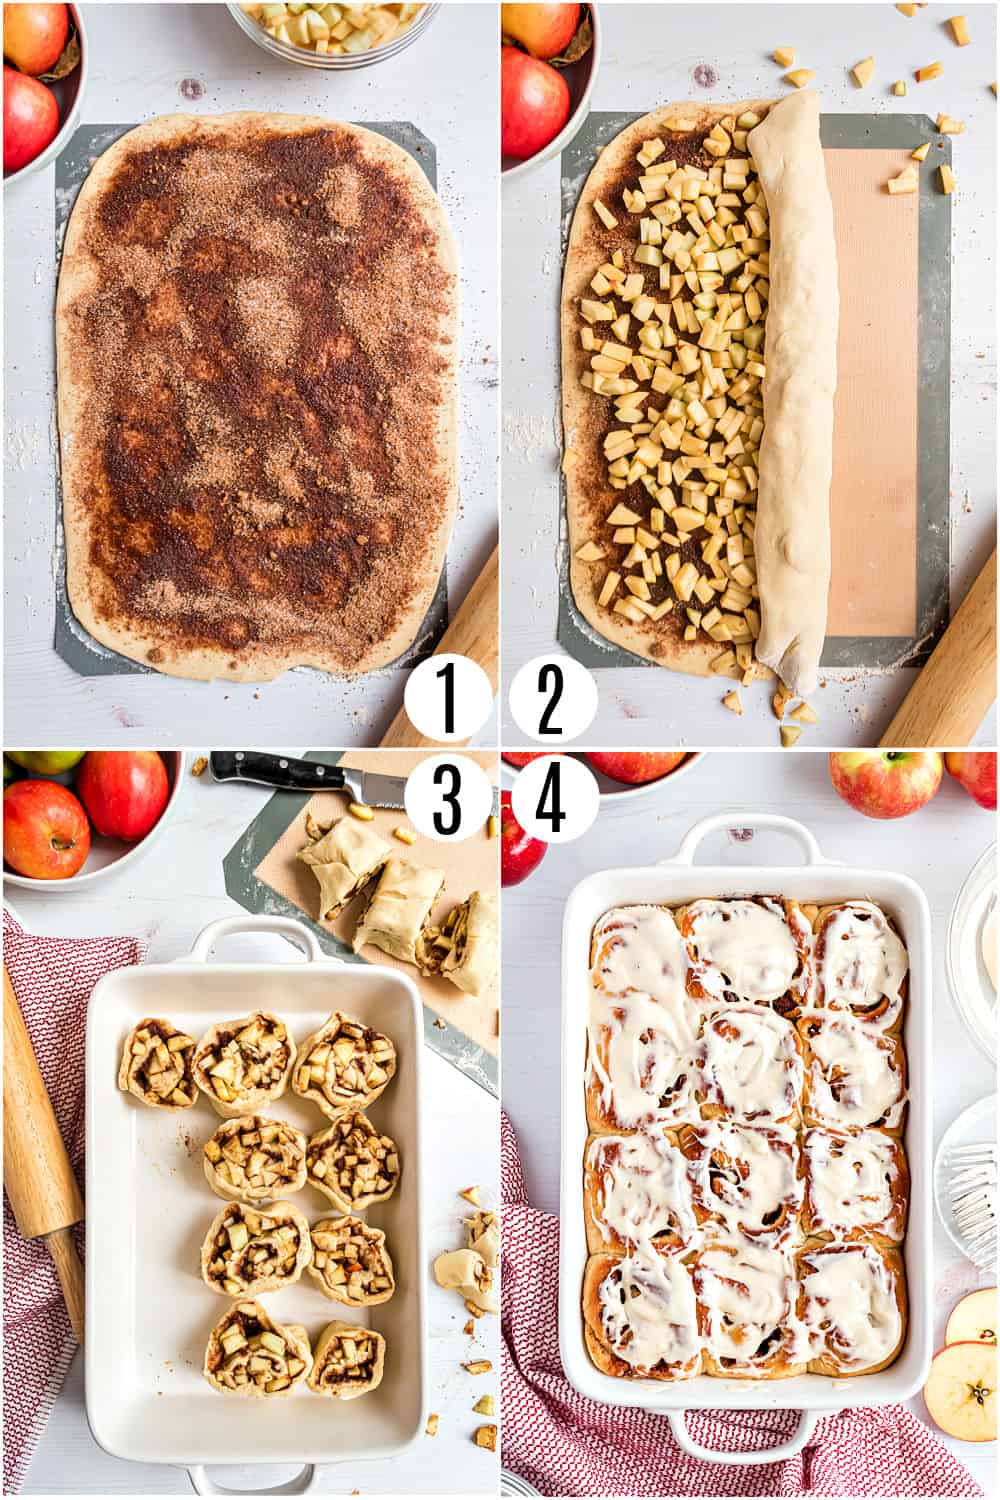 Step by step photos showing how to assemble and bake apple cinnamon rolls.